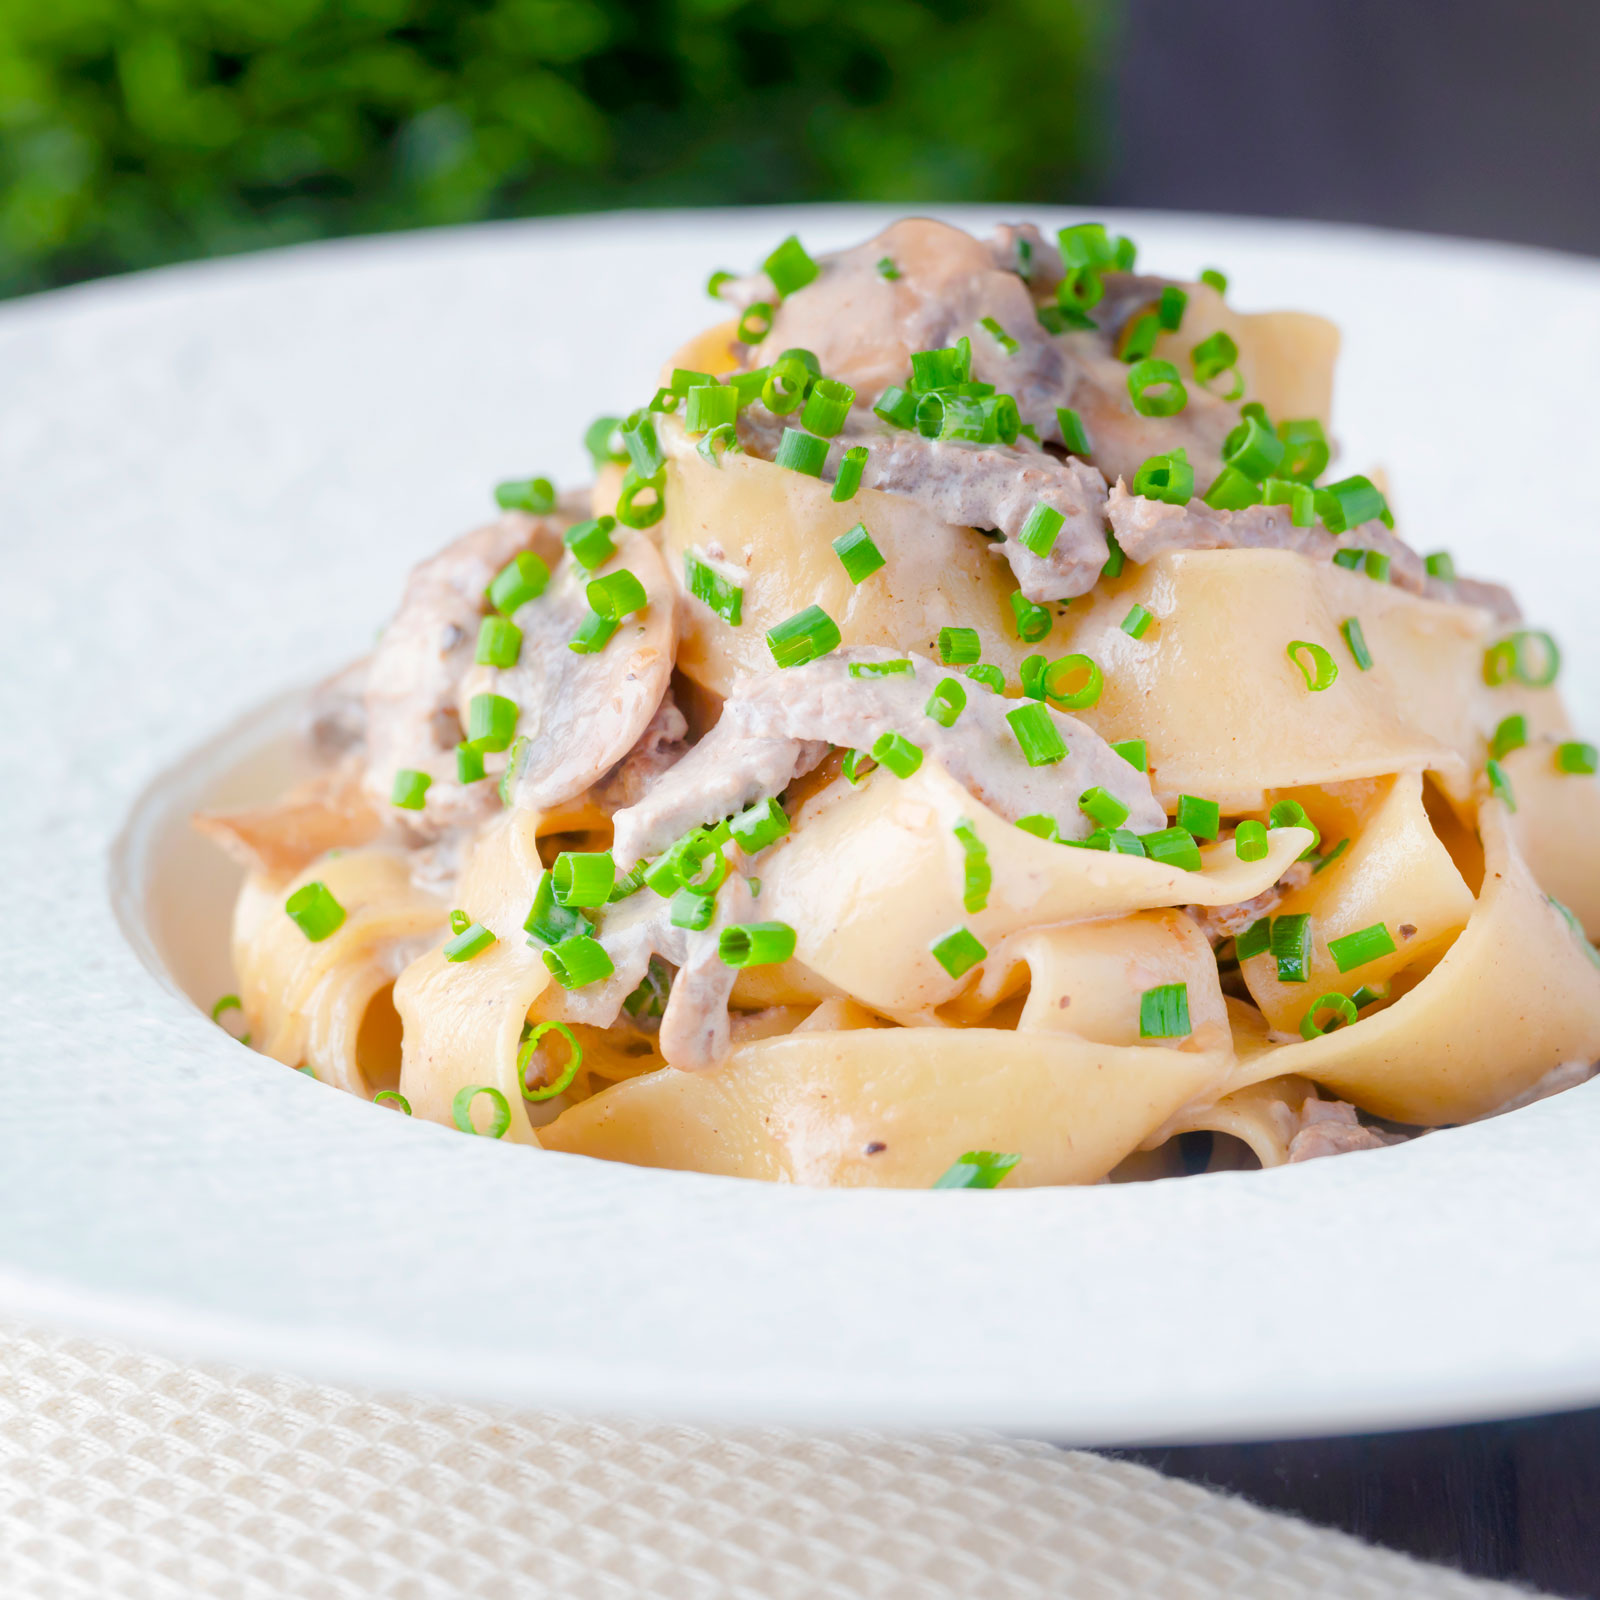 Creamy steak pappardelle pasta with a Diane sauce and snipped chives.